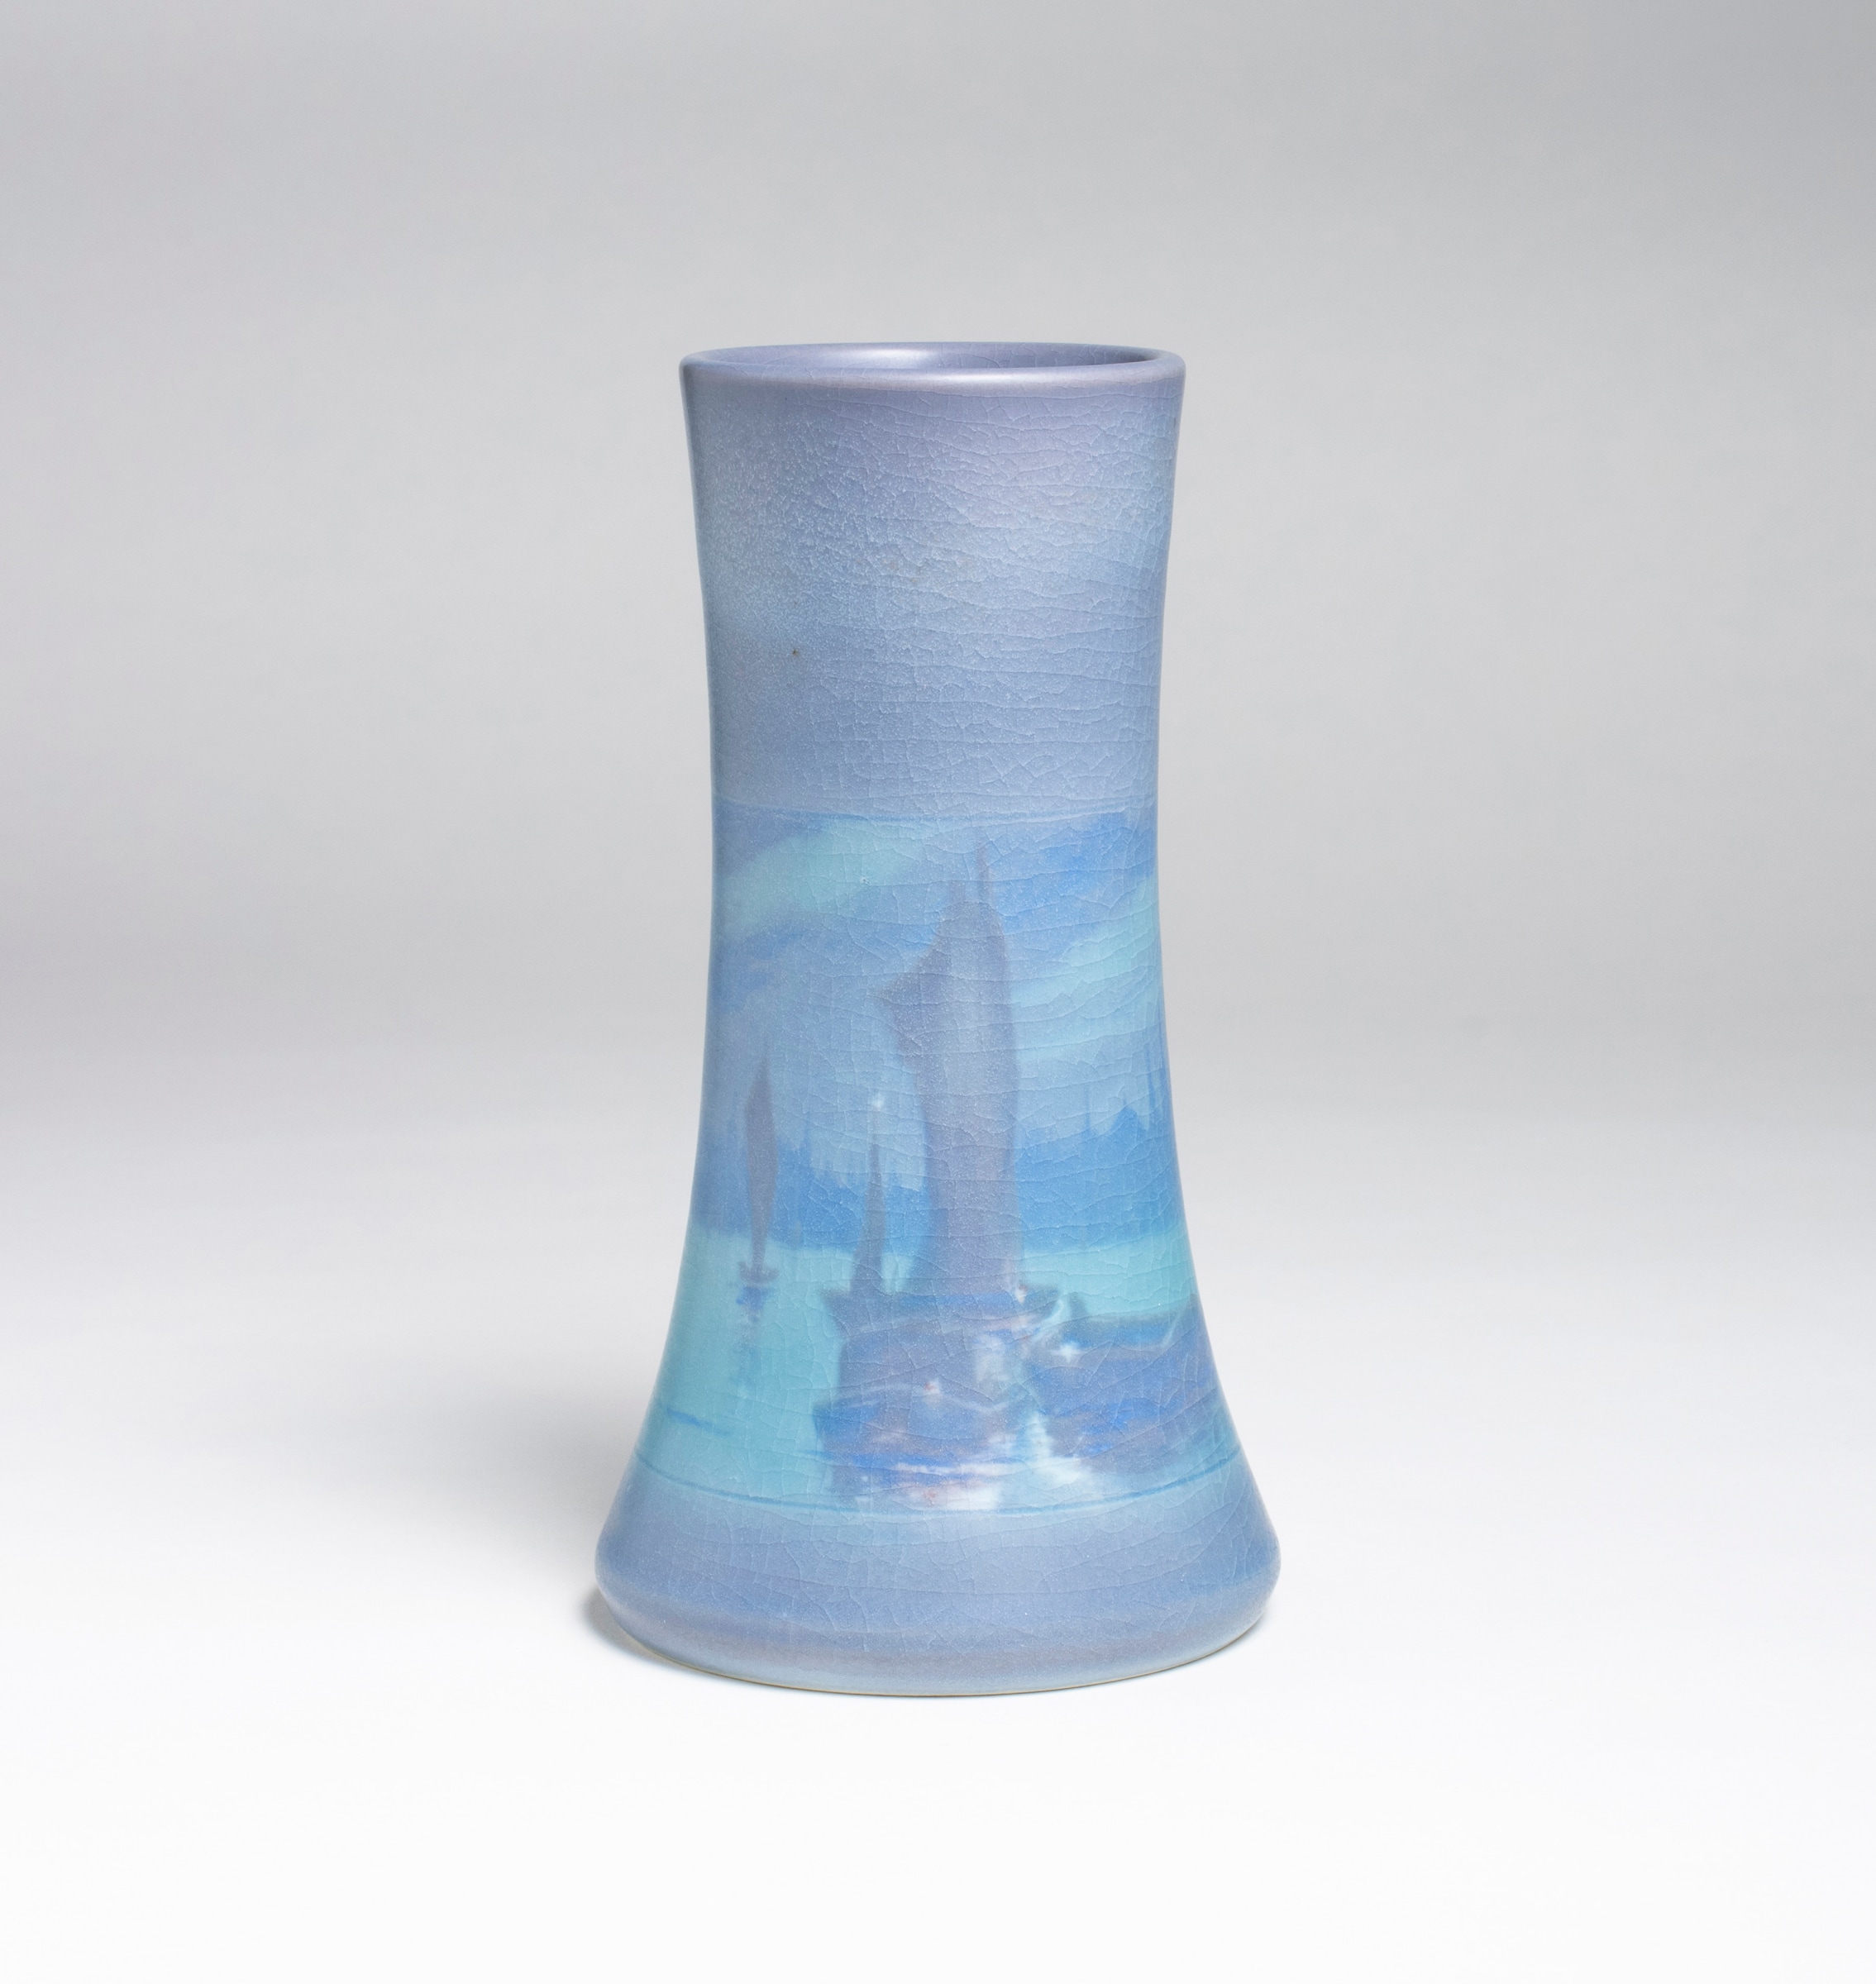 vase in scenic vellum by rookwood pottery designed by fred rothenbusch, waisted cylinder form in pastel lavenders and blues depicting an evening harbor scene at twilight